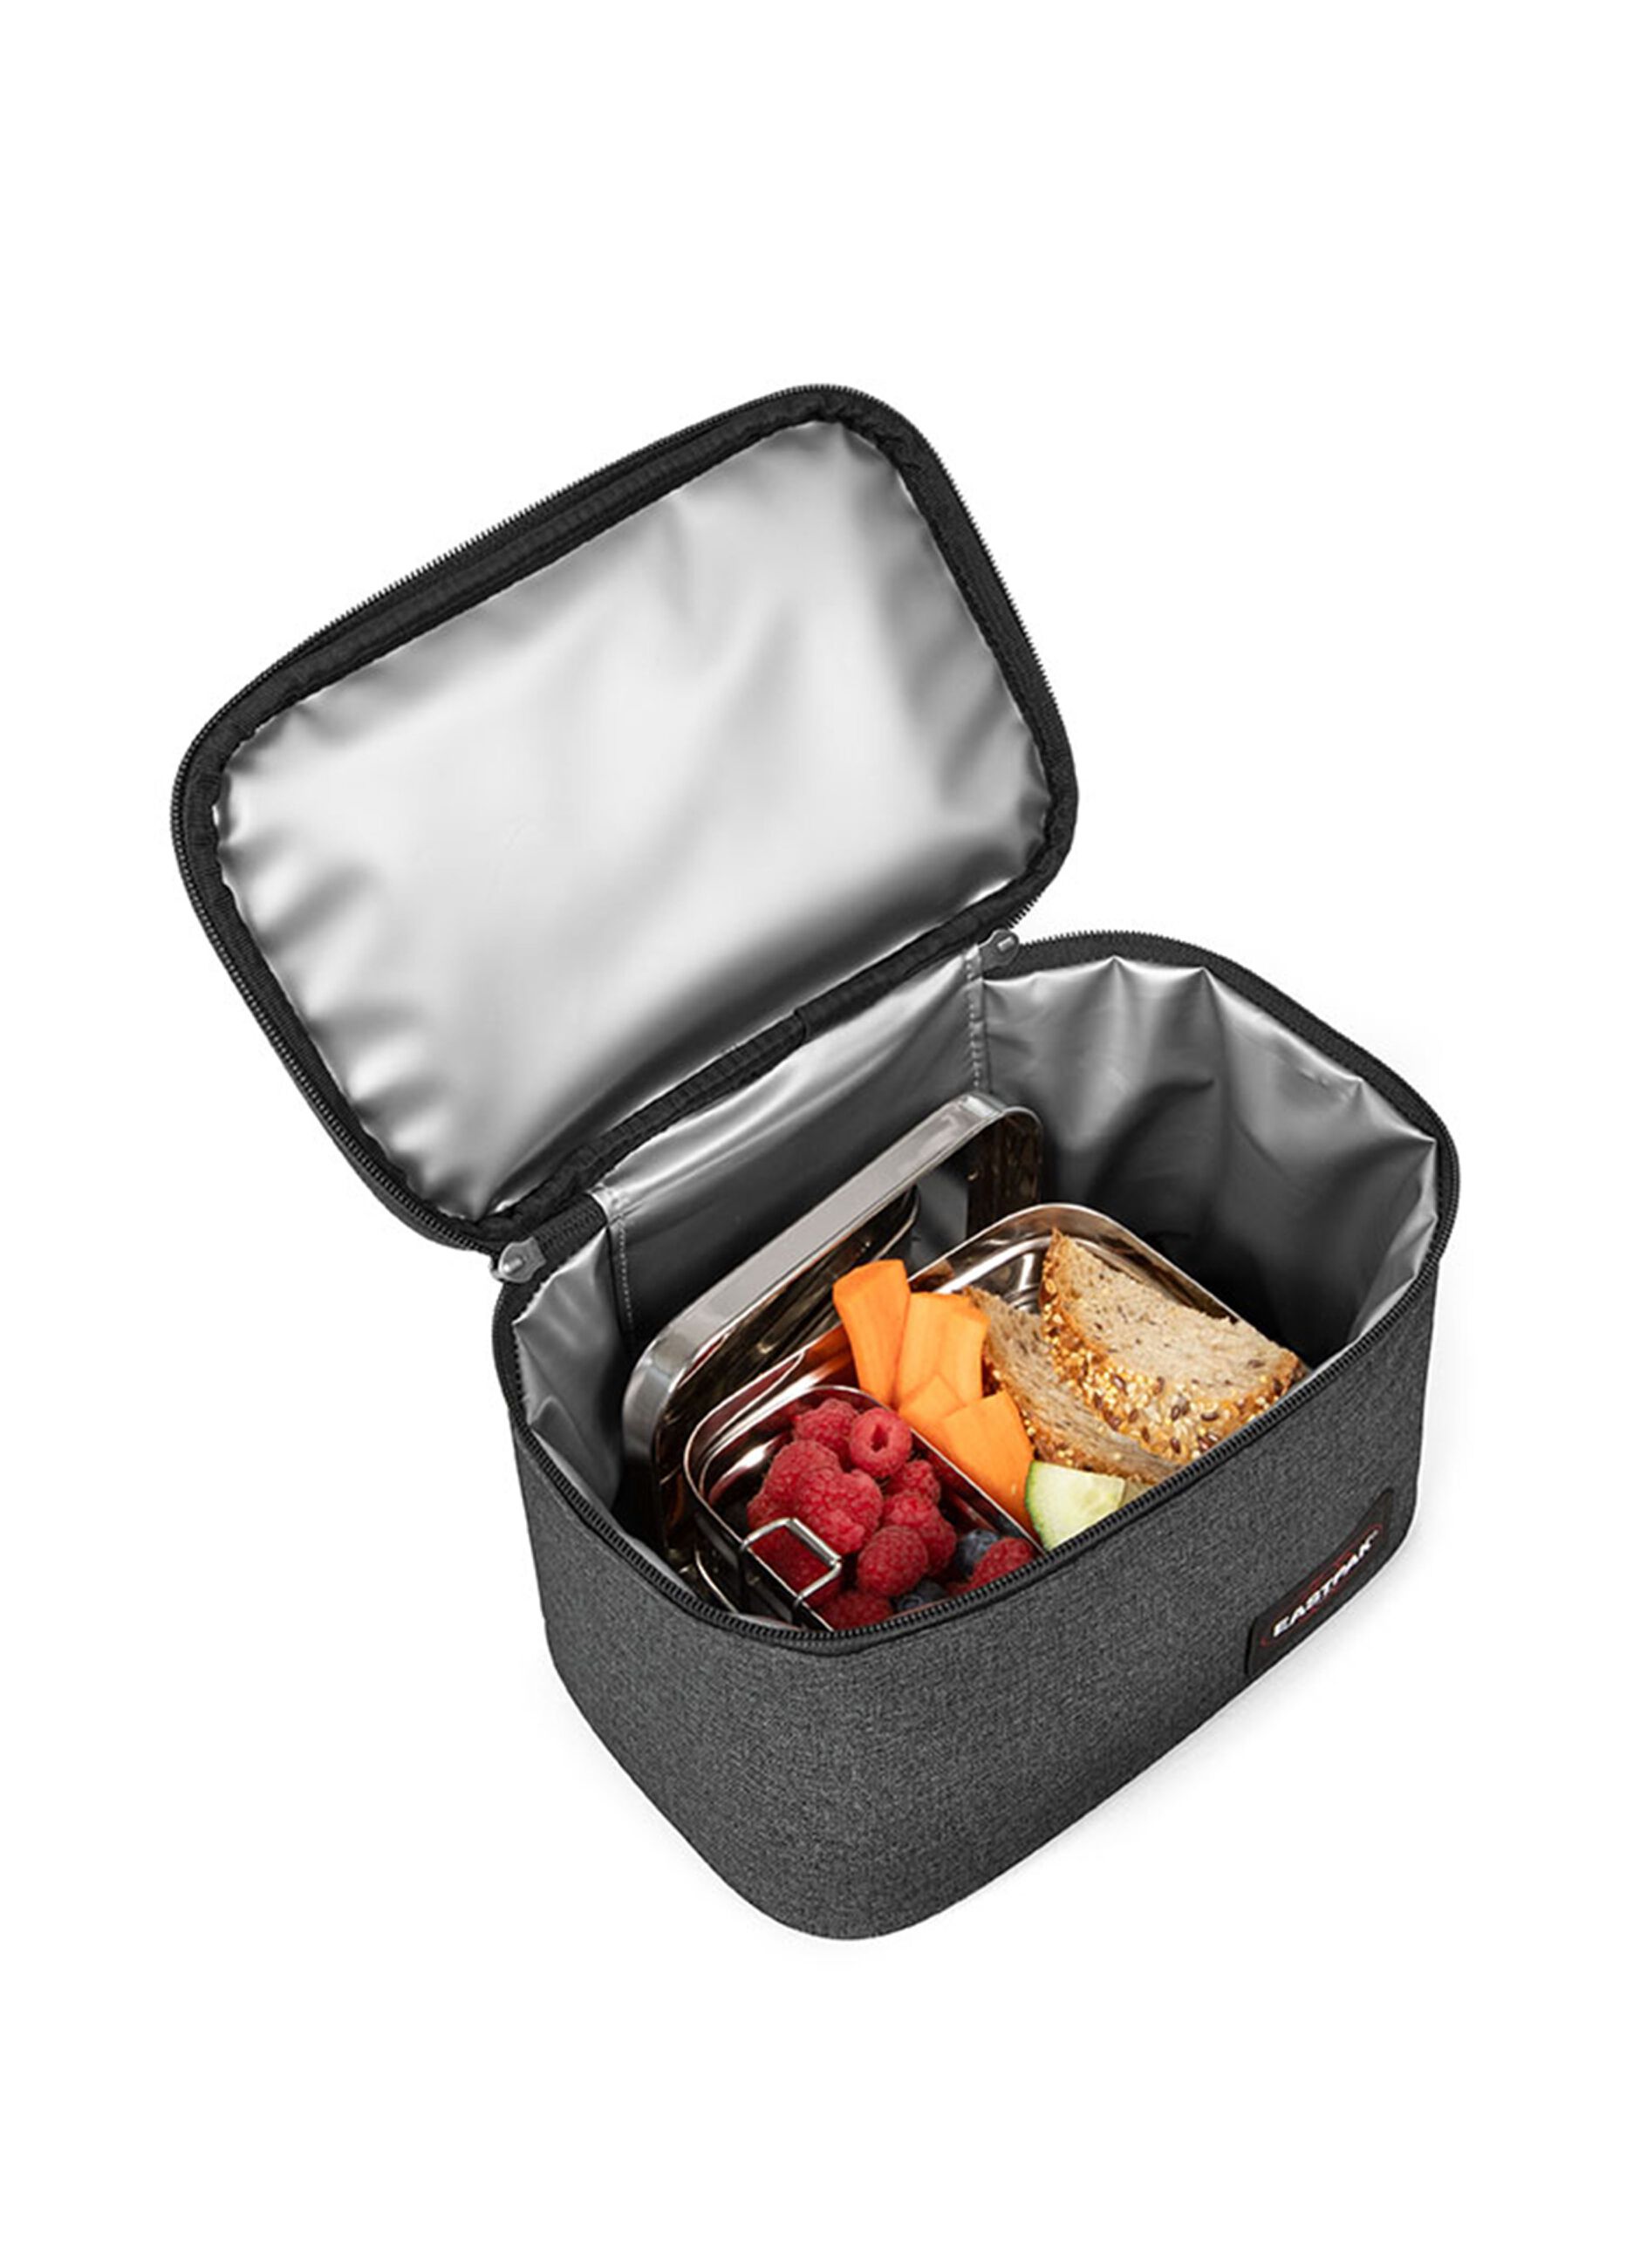 Eastpak Oval Lunch thermal bag